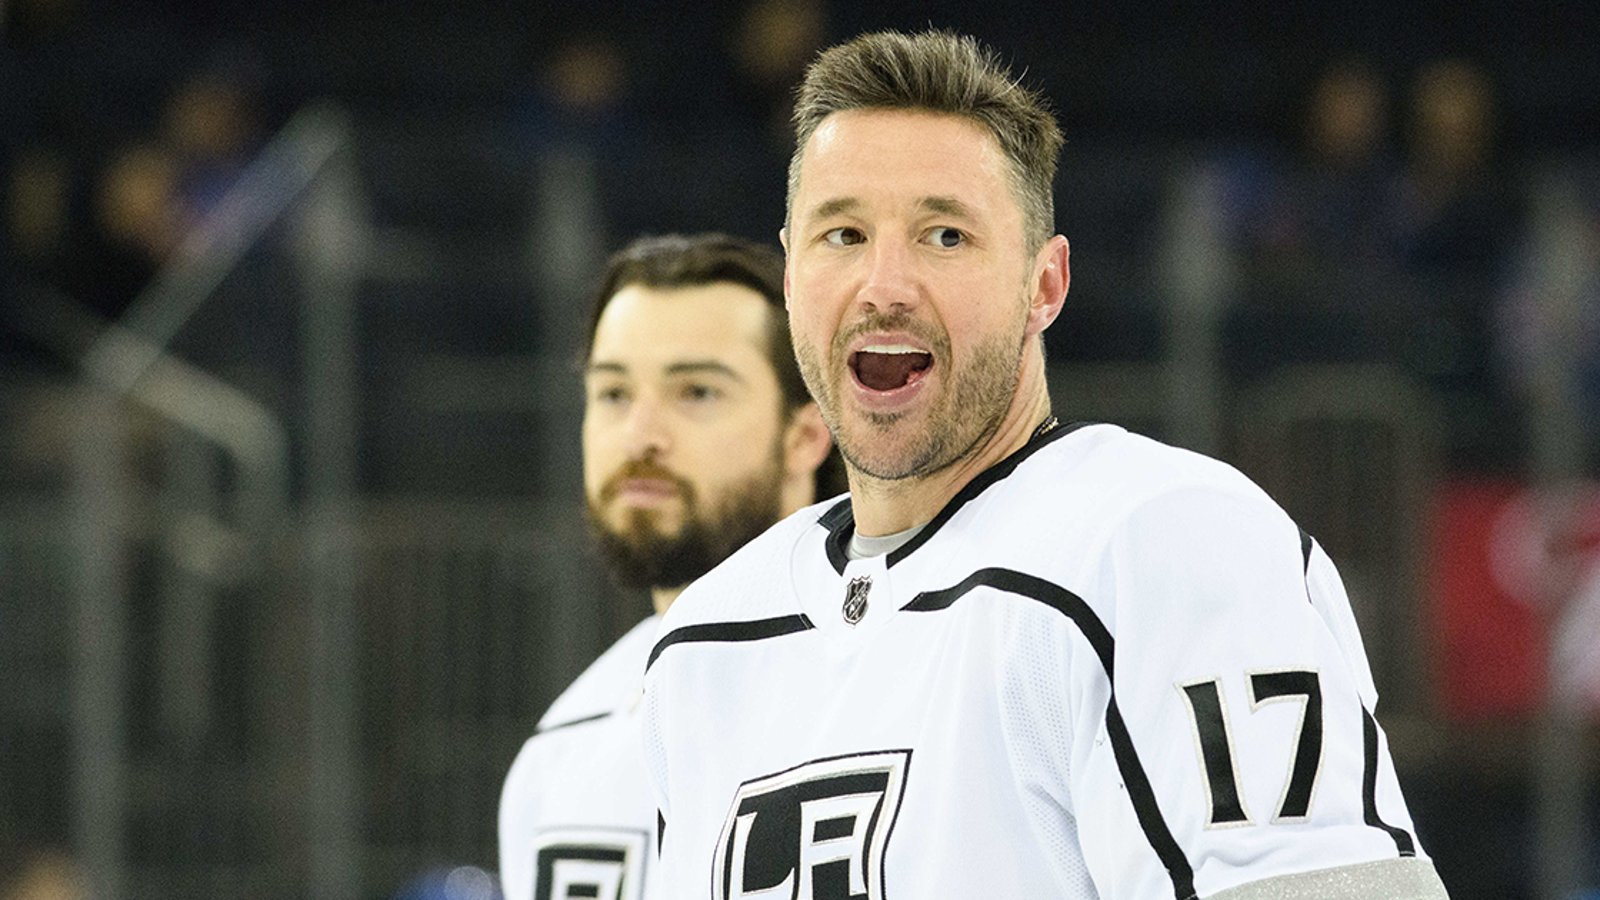 Breaking: Kovalchuk has agreed to waive no-trade clause, Eastern Conference contender reportedly in pursuit